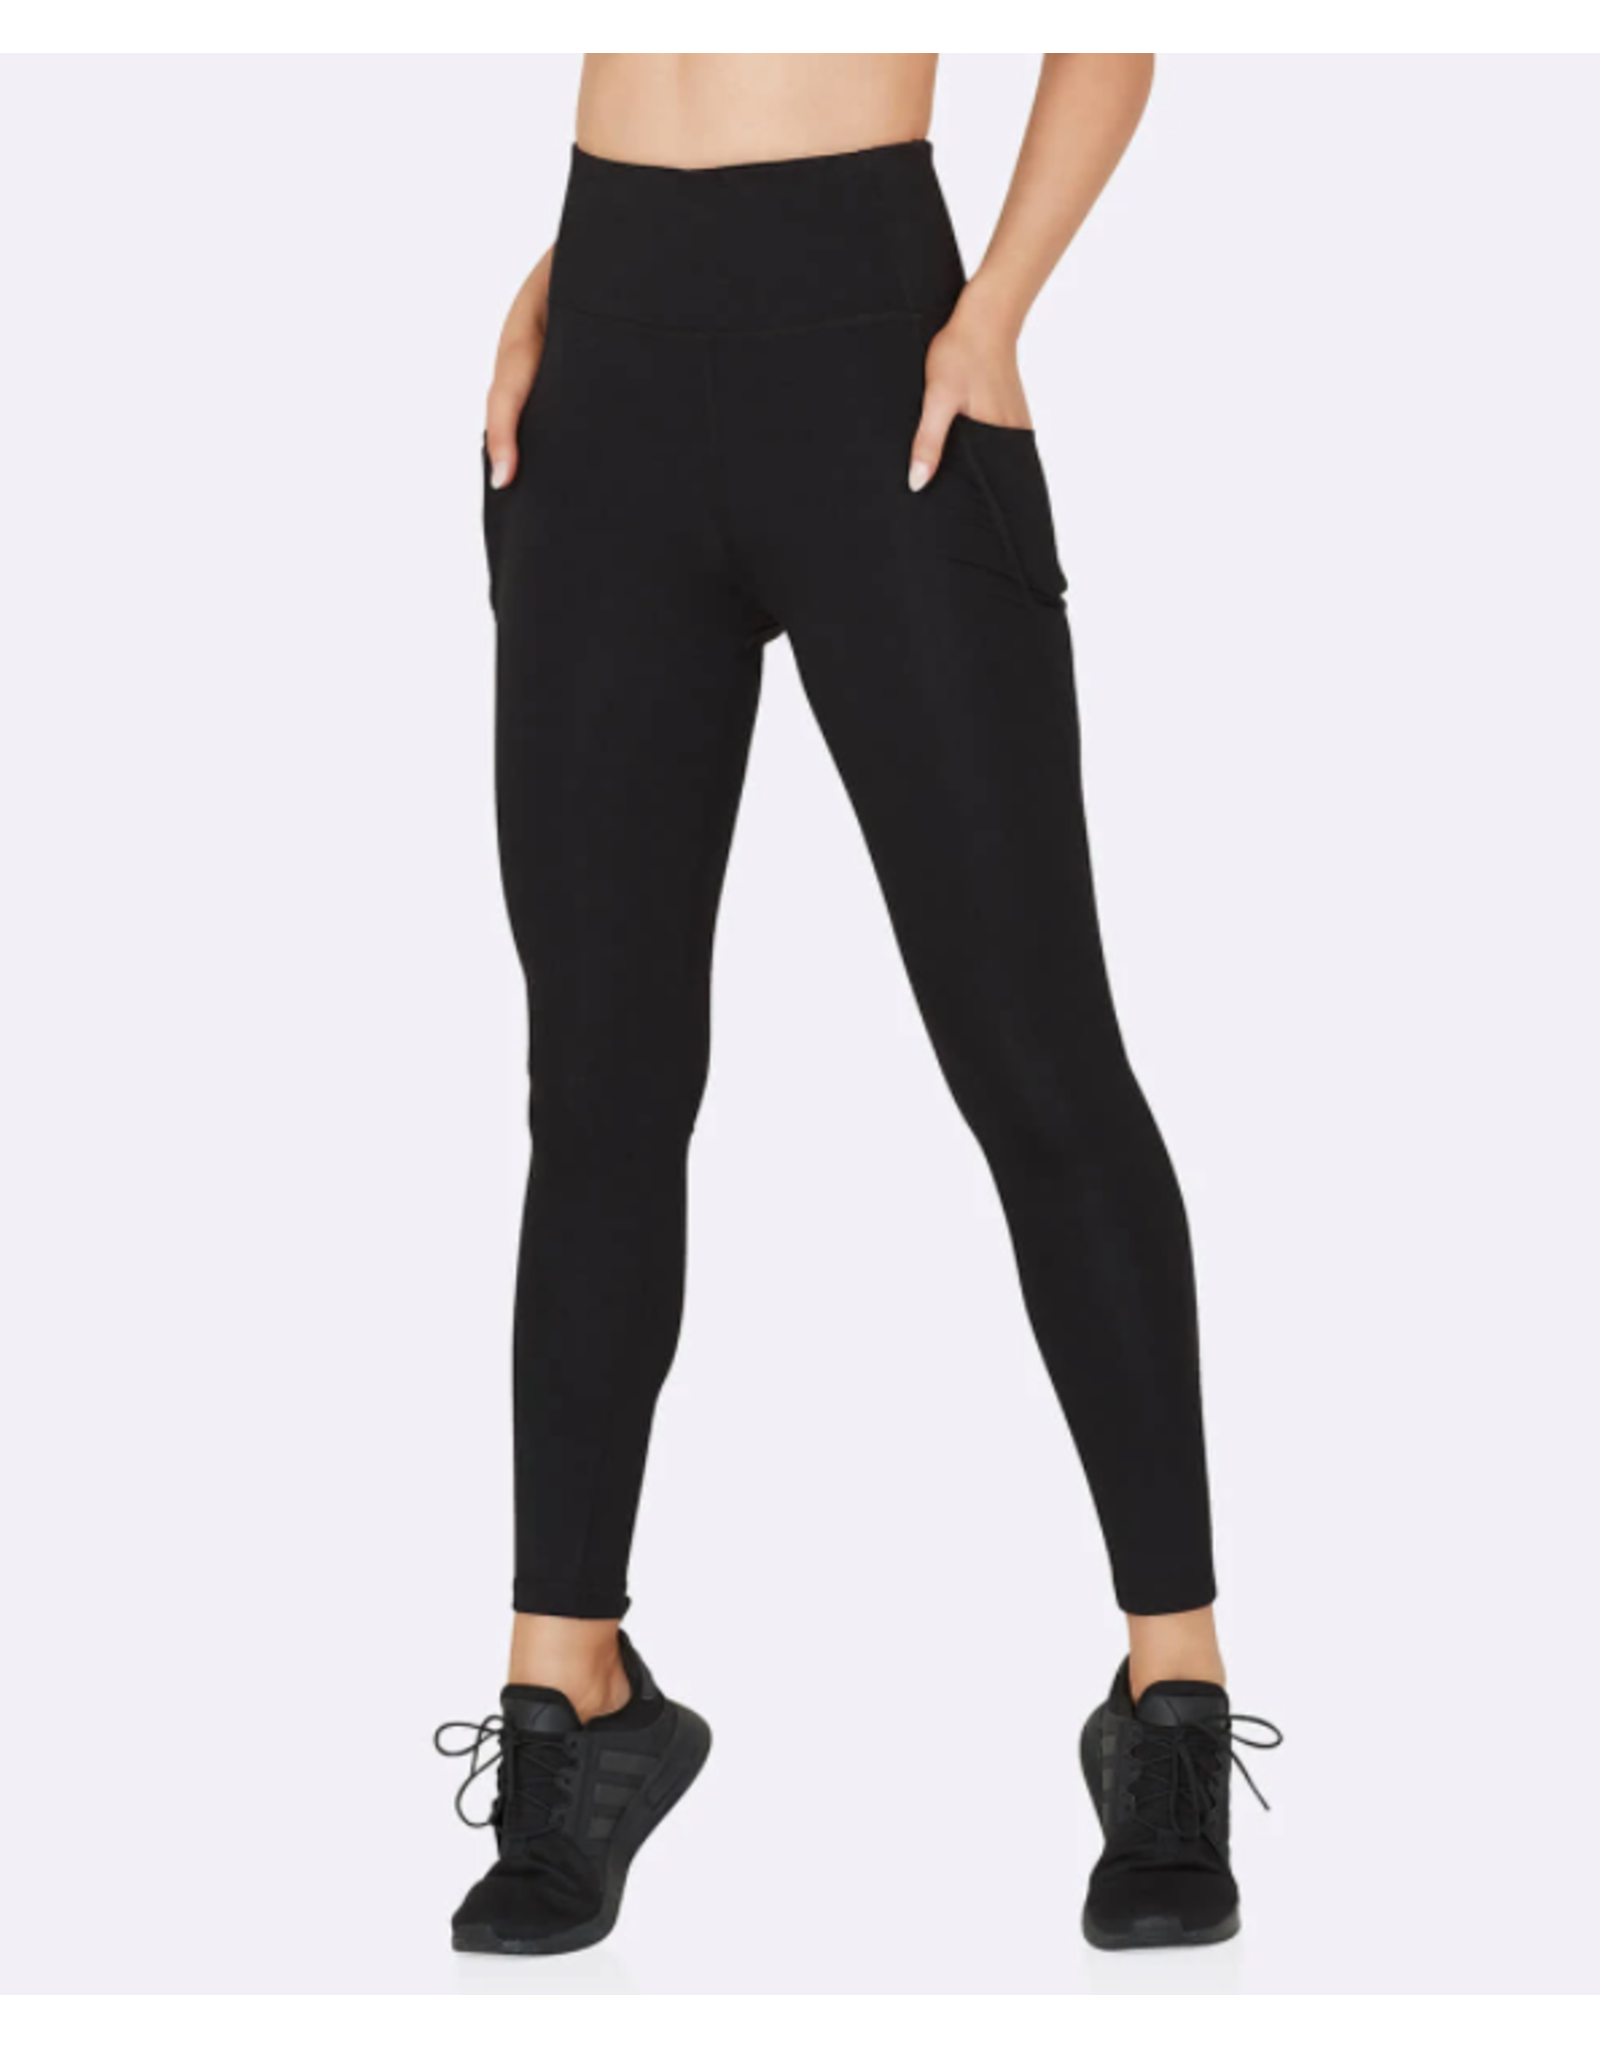 Boody Boody Active High Waist Full Legging with Pockets